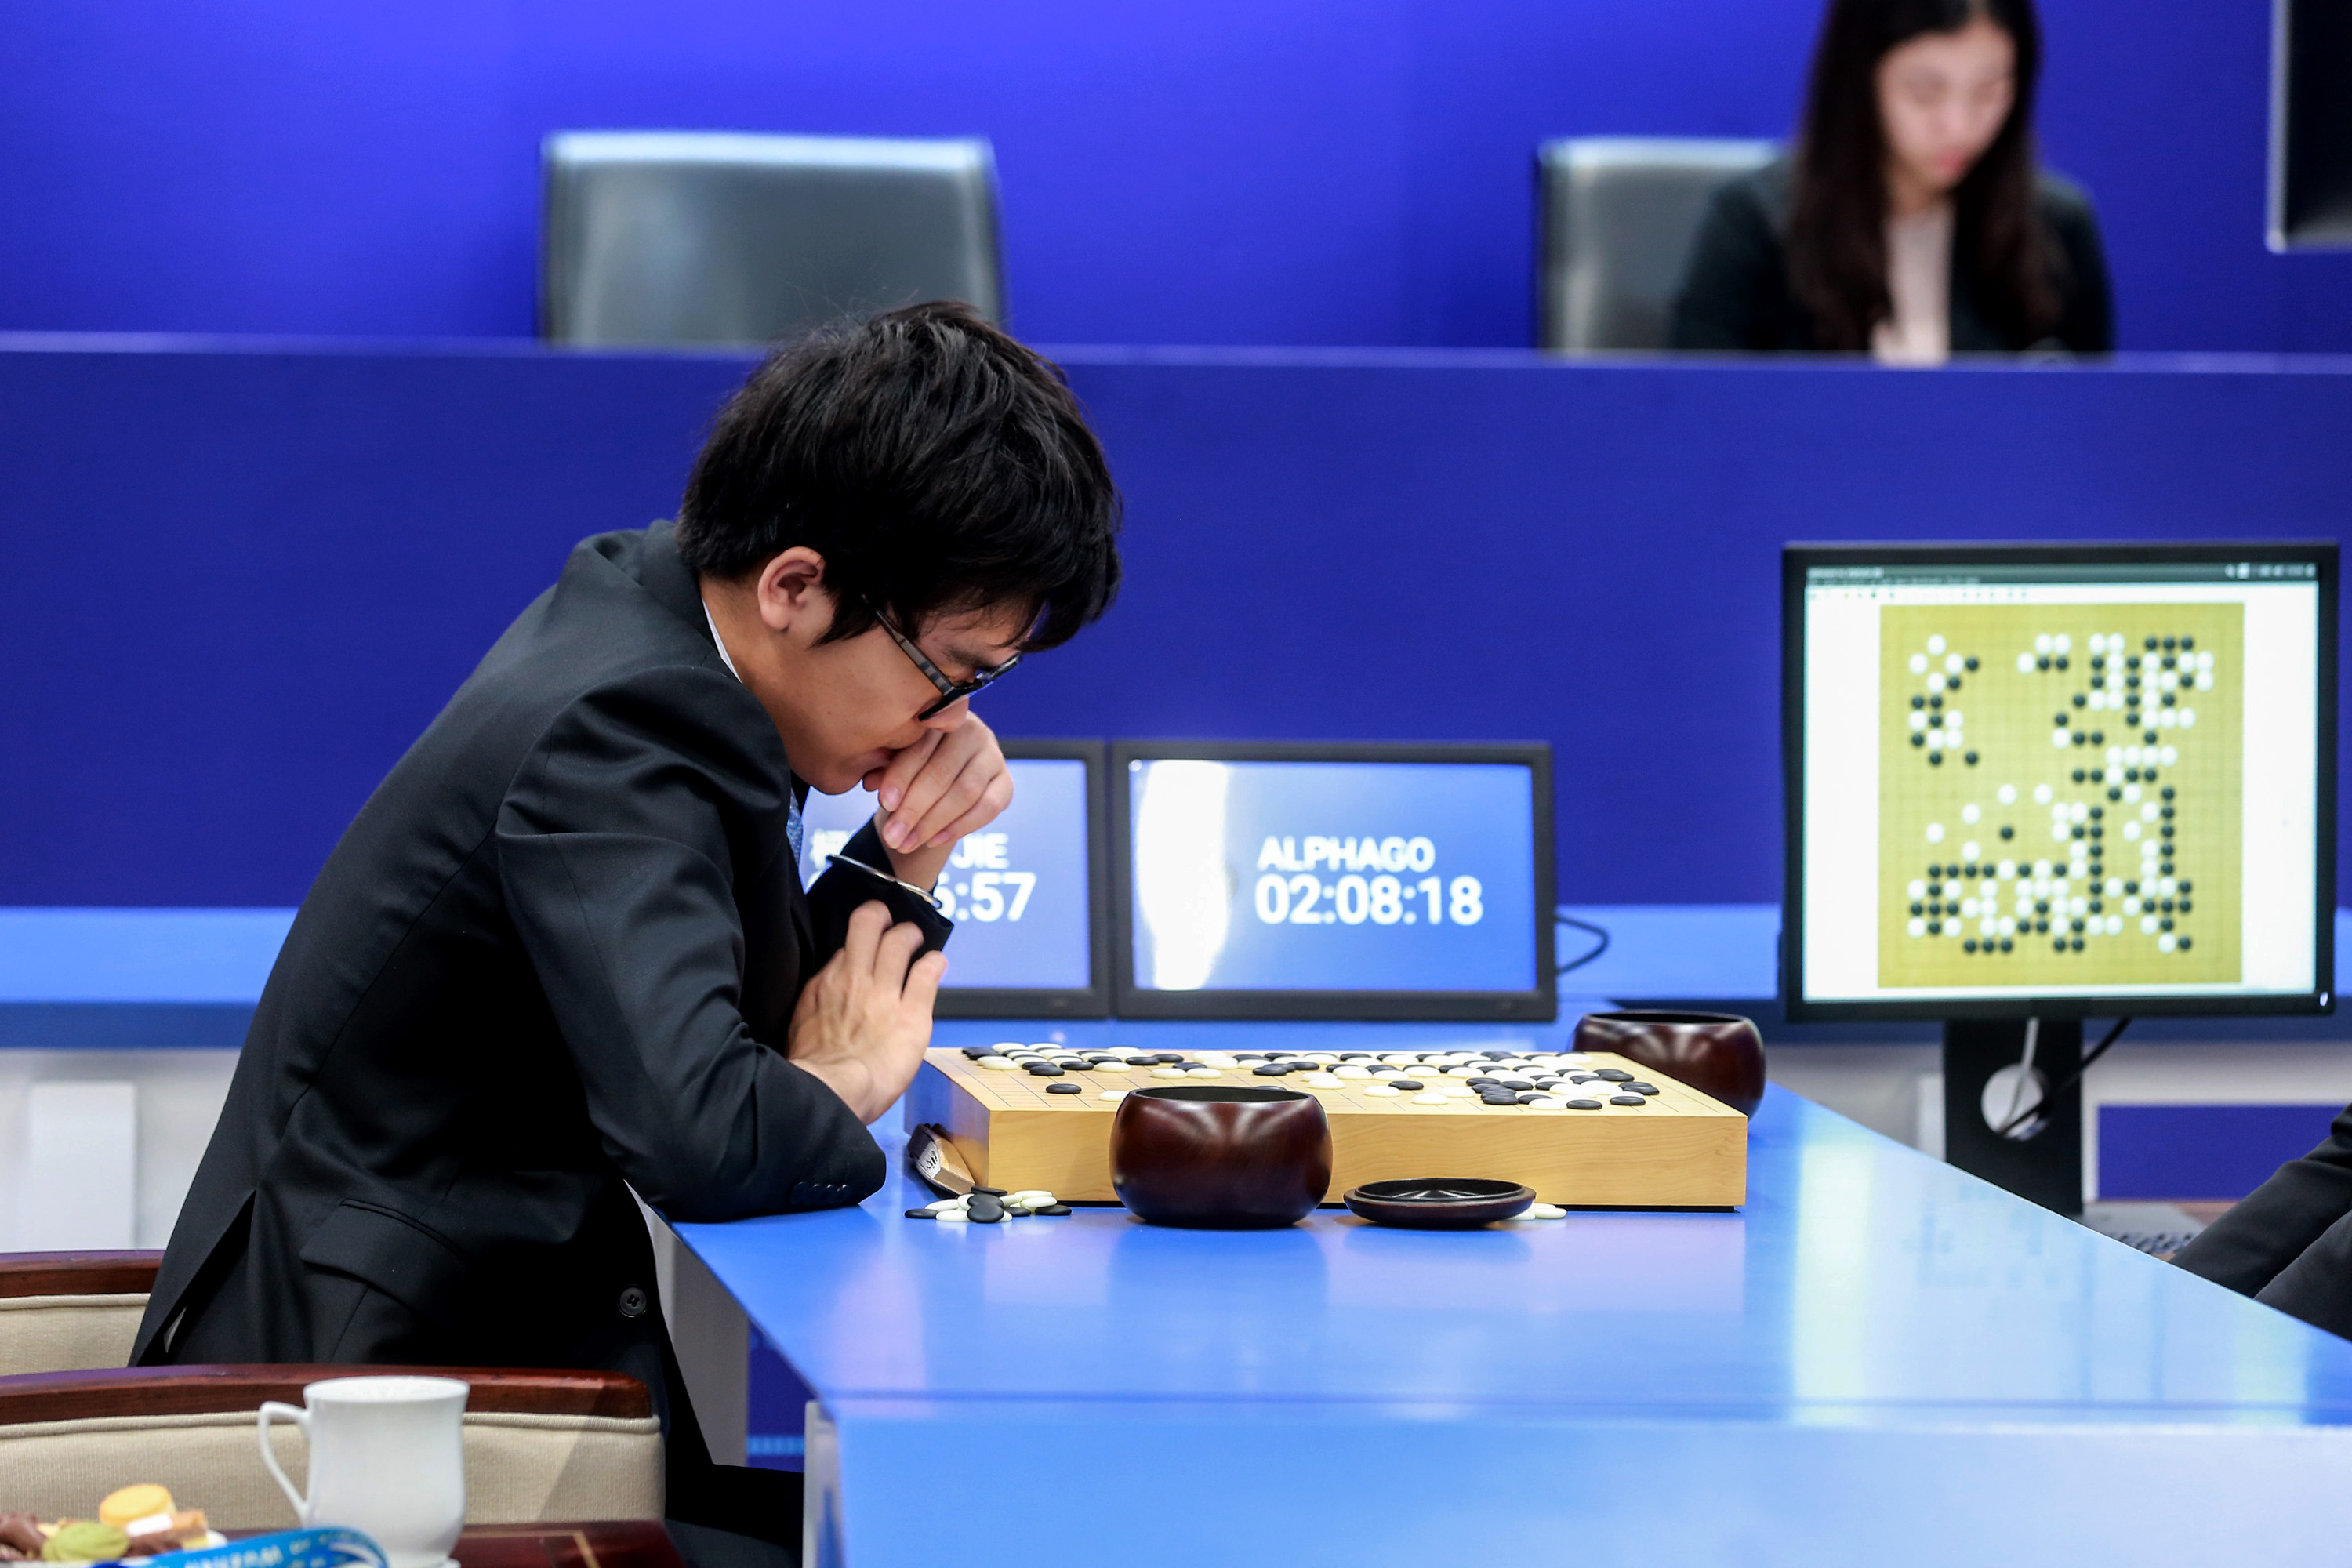 China's 19-year-old Go player Ke Jie prepares to make a move during the second match against Google's artificial intelligence program AlphaGo in Wuzhen, in eastern China's Zhejiang province on May 25, 2017. 